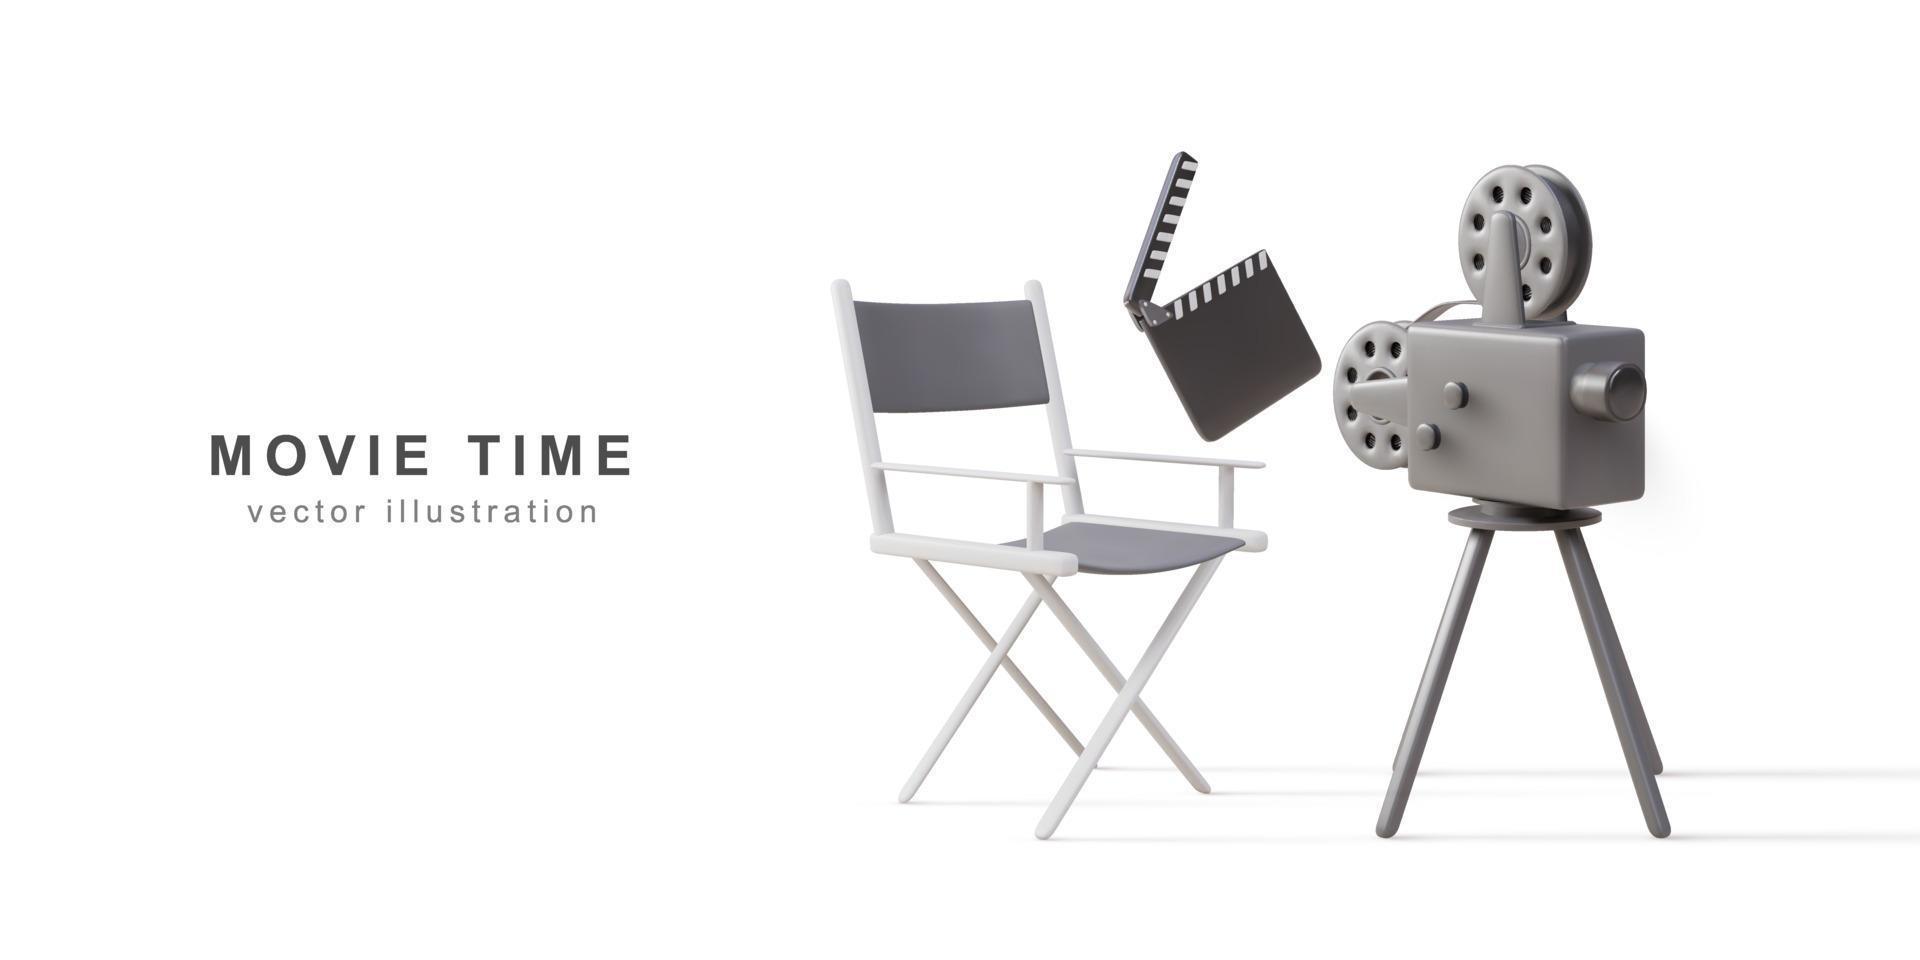 3d retro camera, clapperboard and director chair. Vector illustration.